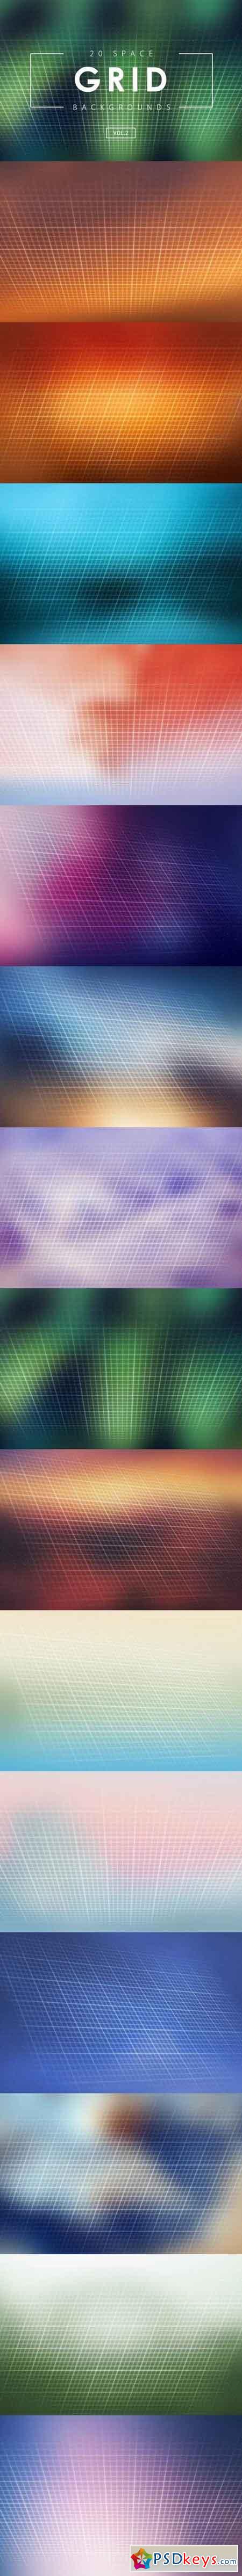 20 Space Grid Backgrounds Vol. 2